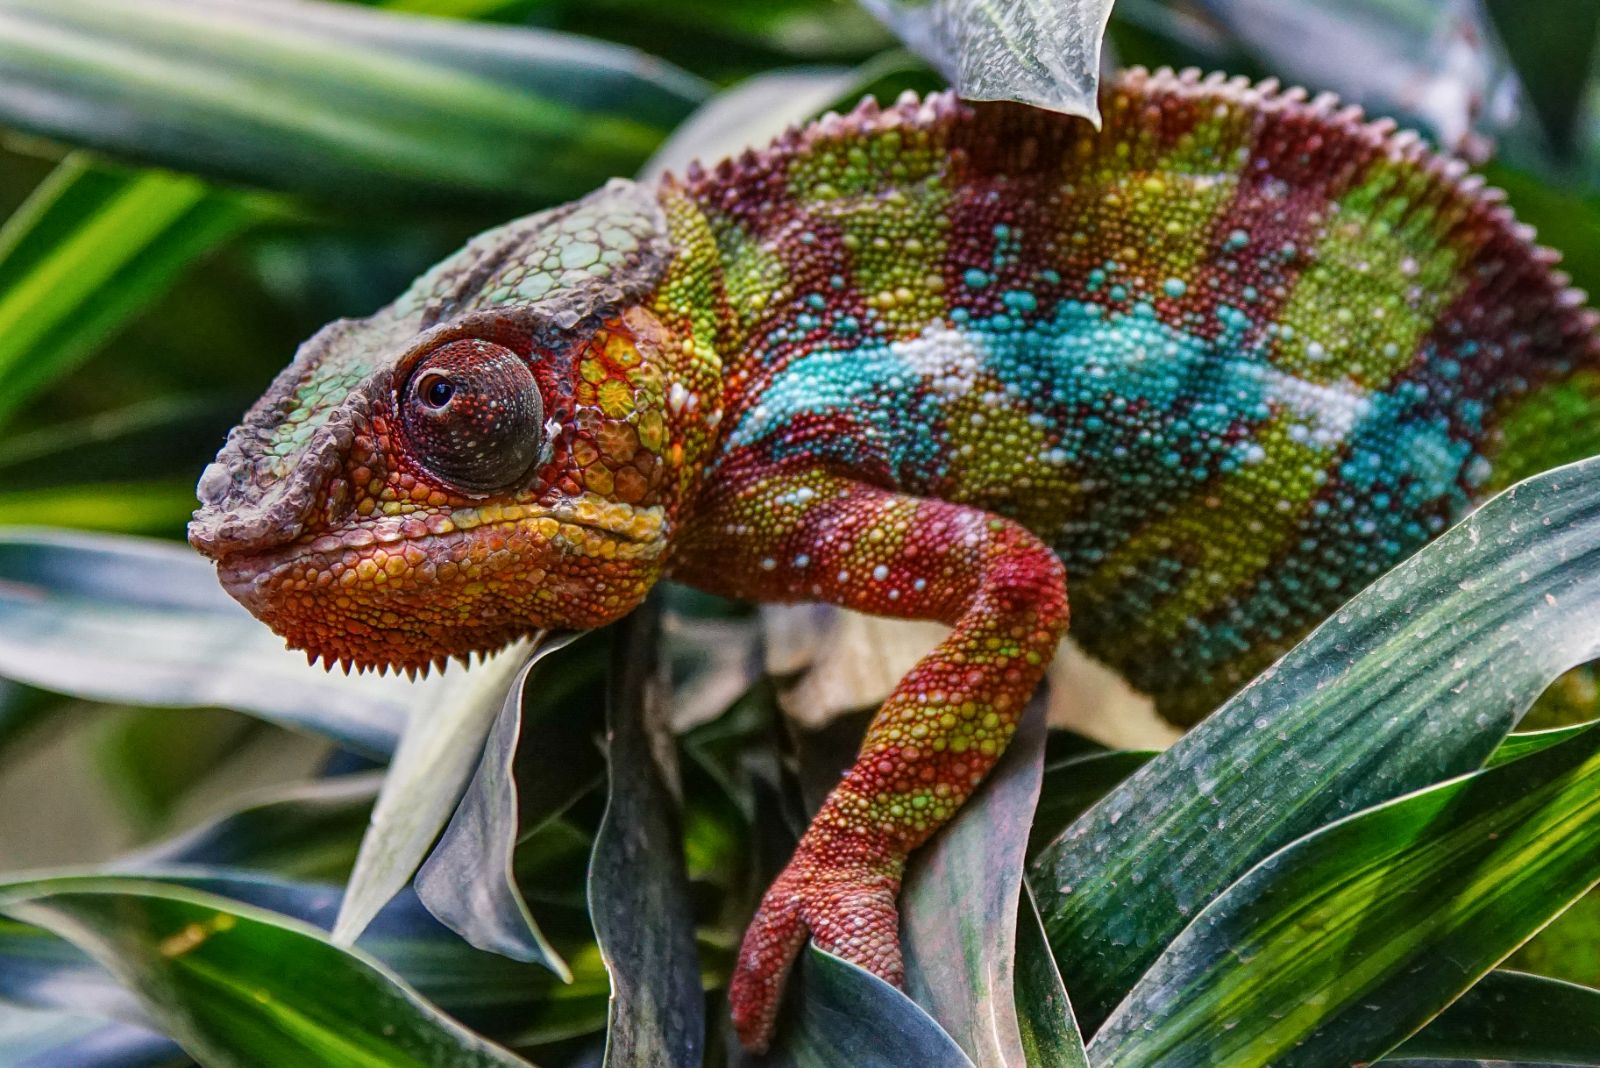 Colourful panther chameleon in the jungles of Madagascar